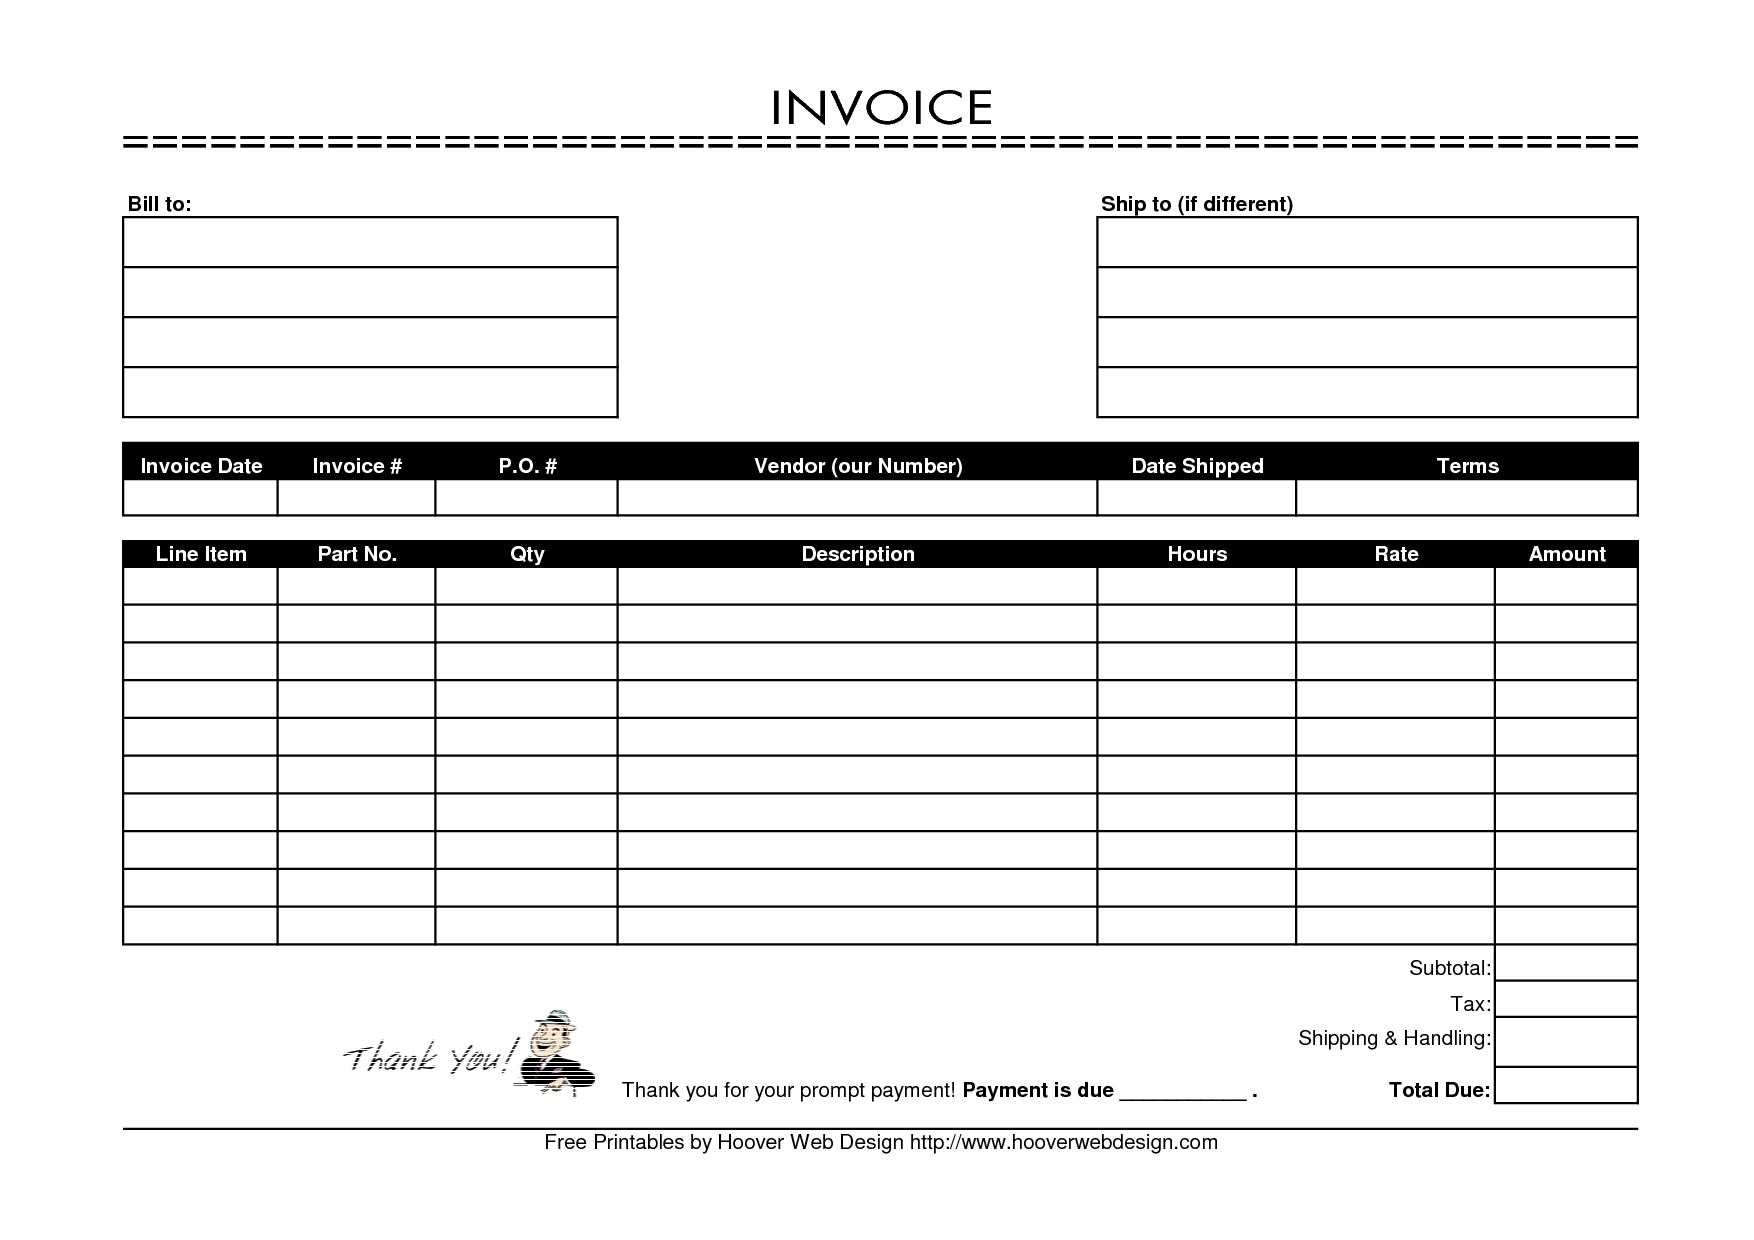 free printable invoice form citizens bank teller sample resume printable invoice form